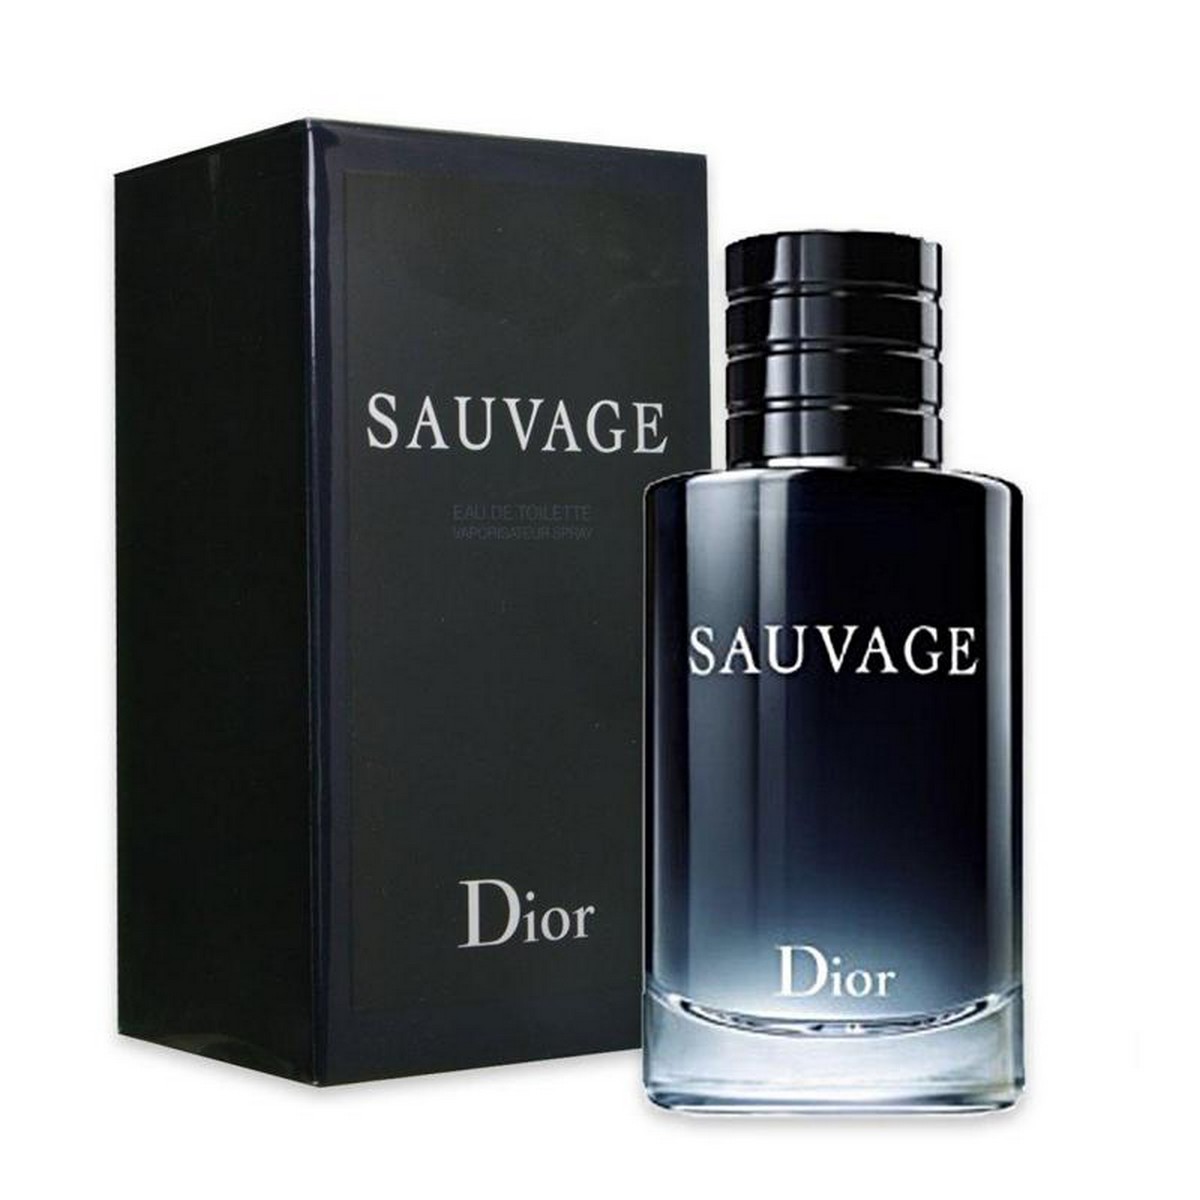 Dior Sauvage Dossier.co Review (Aug 2021) Is This Legit?